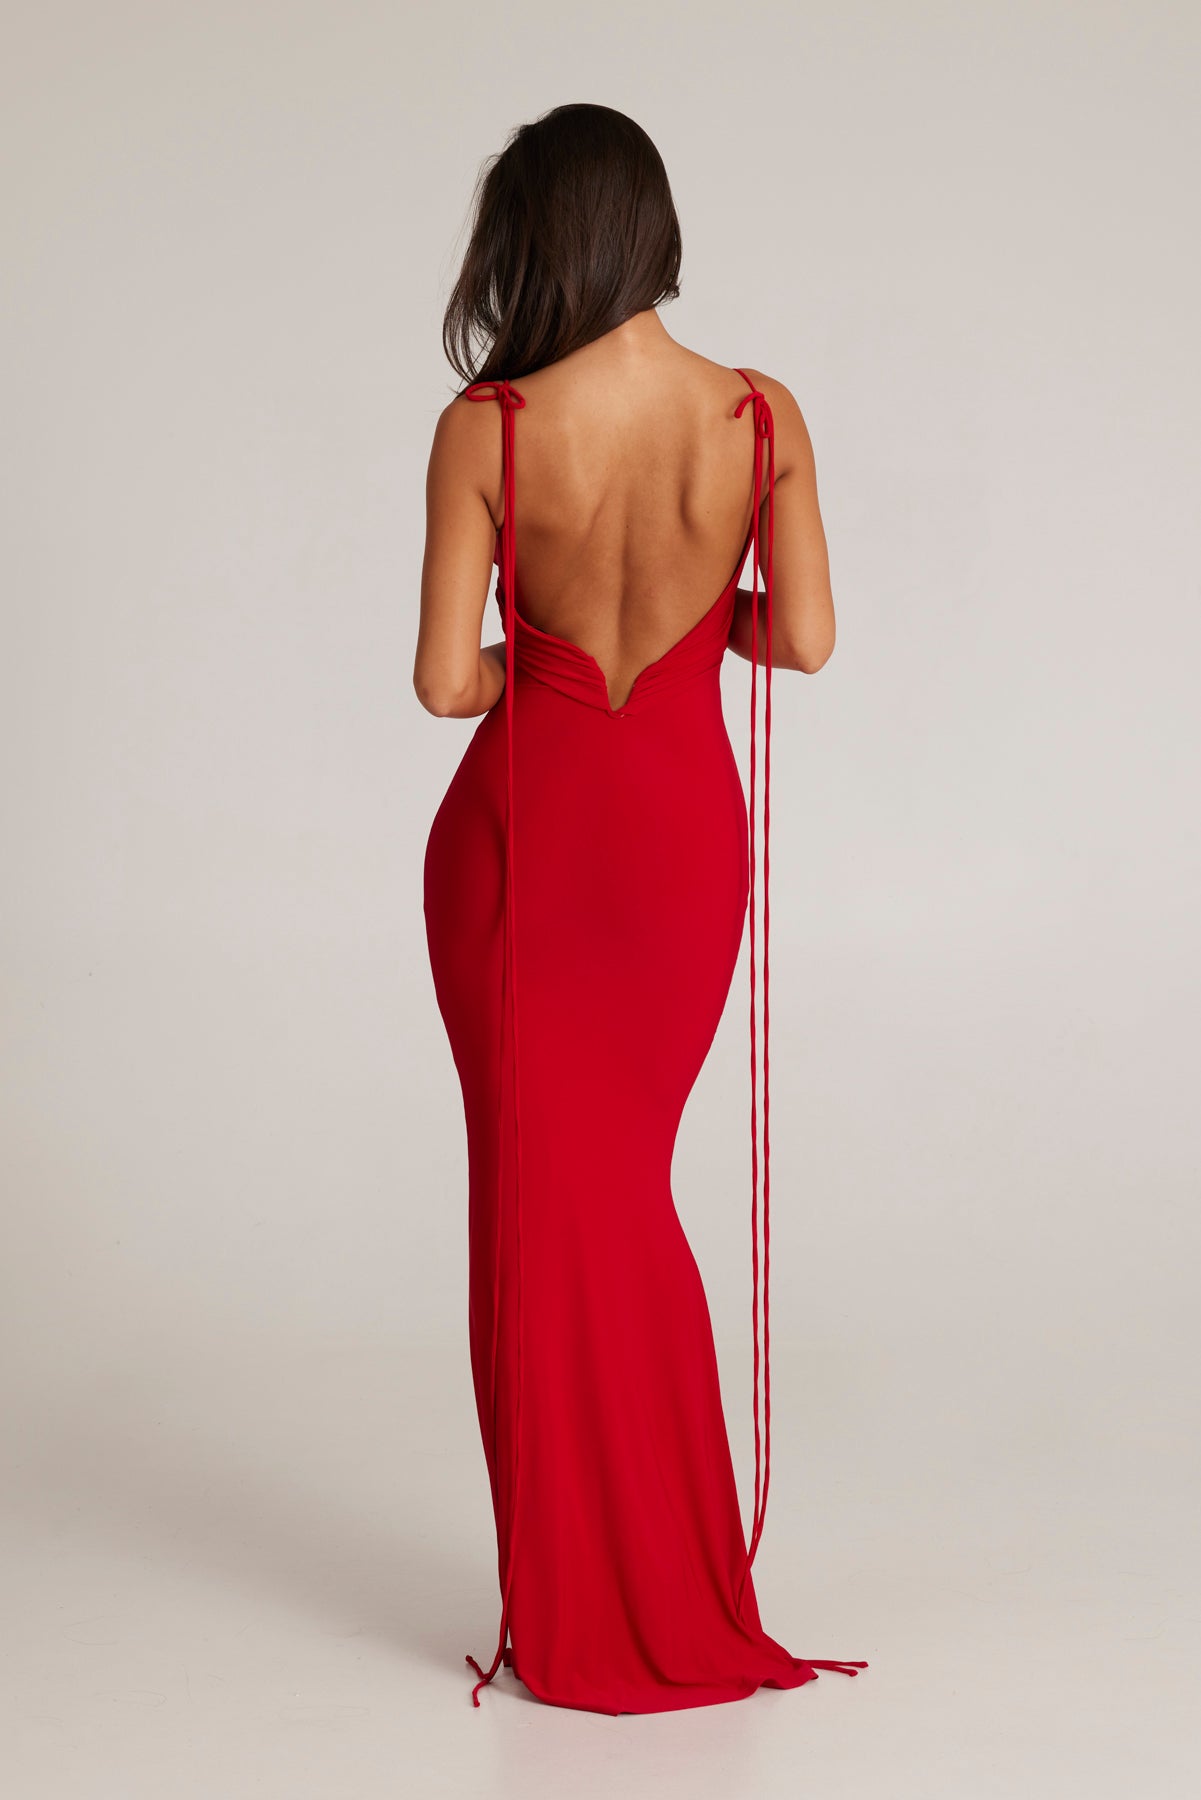 ANTONIA GOWN - RED